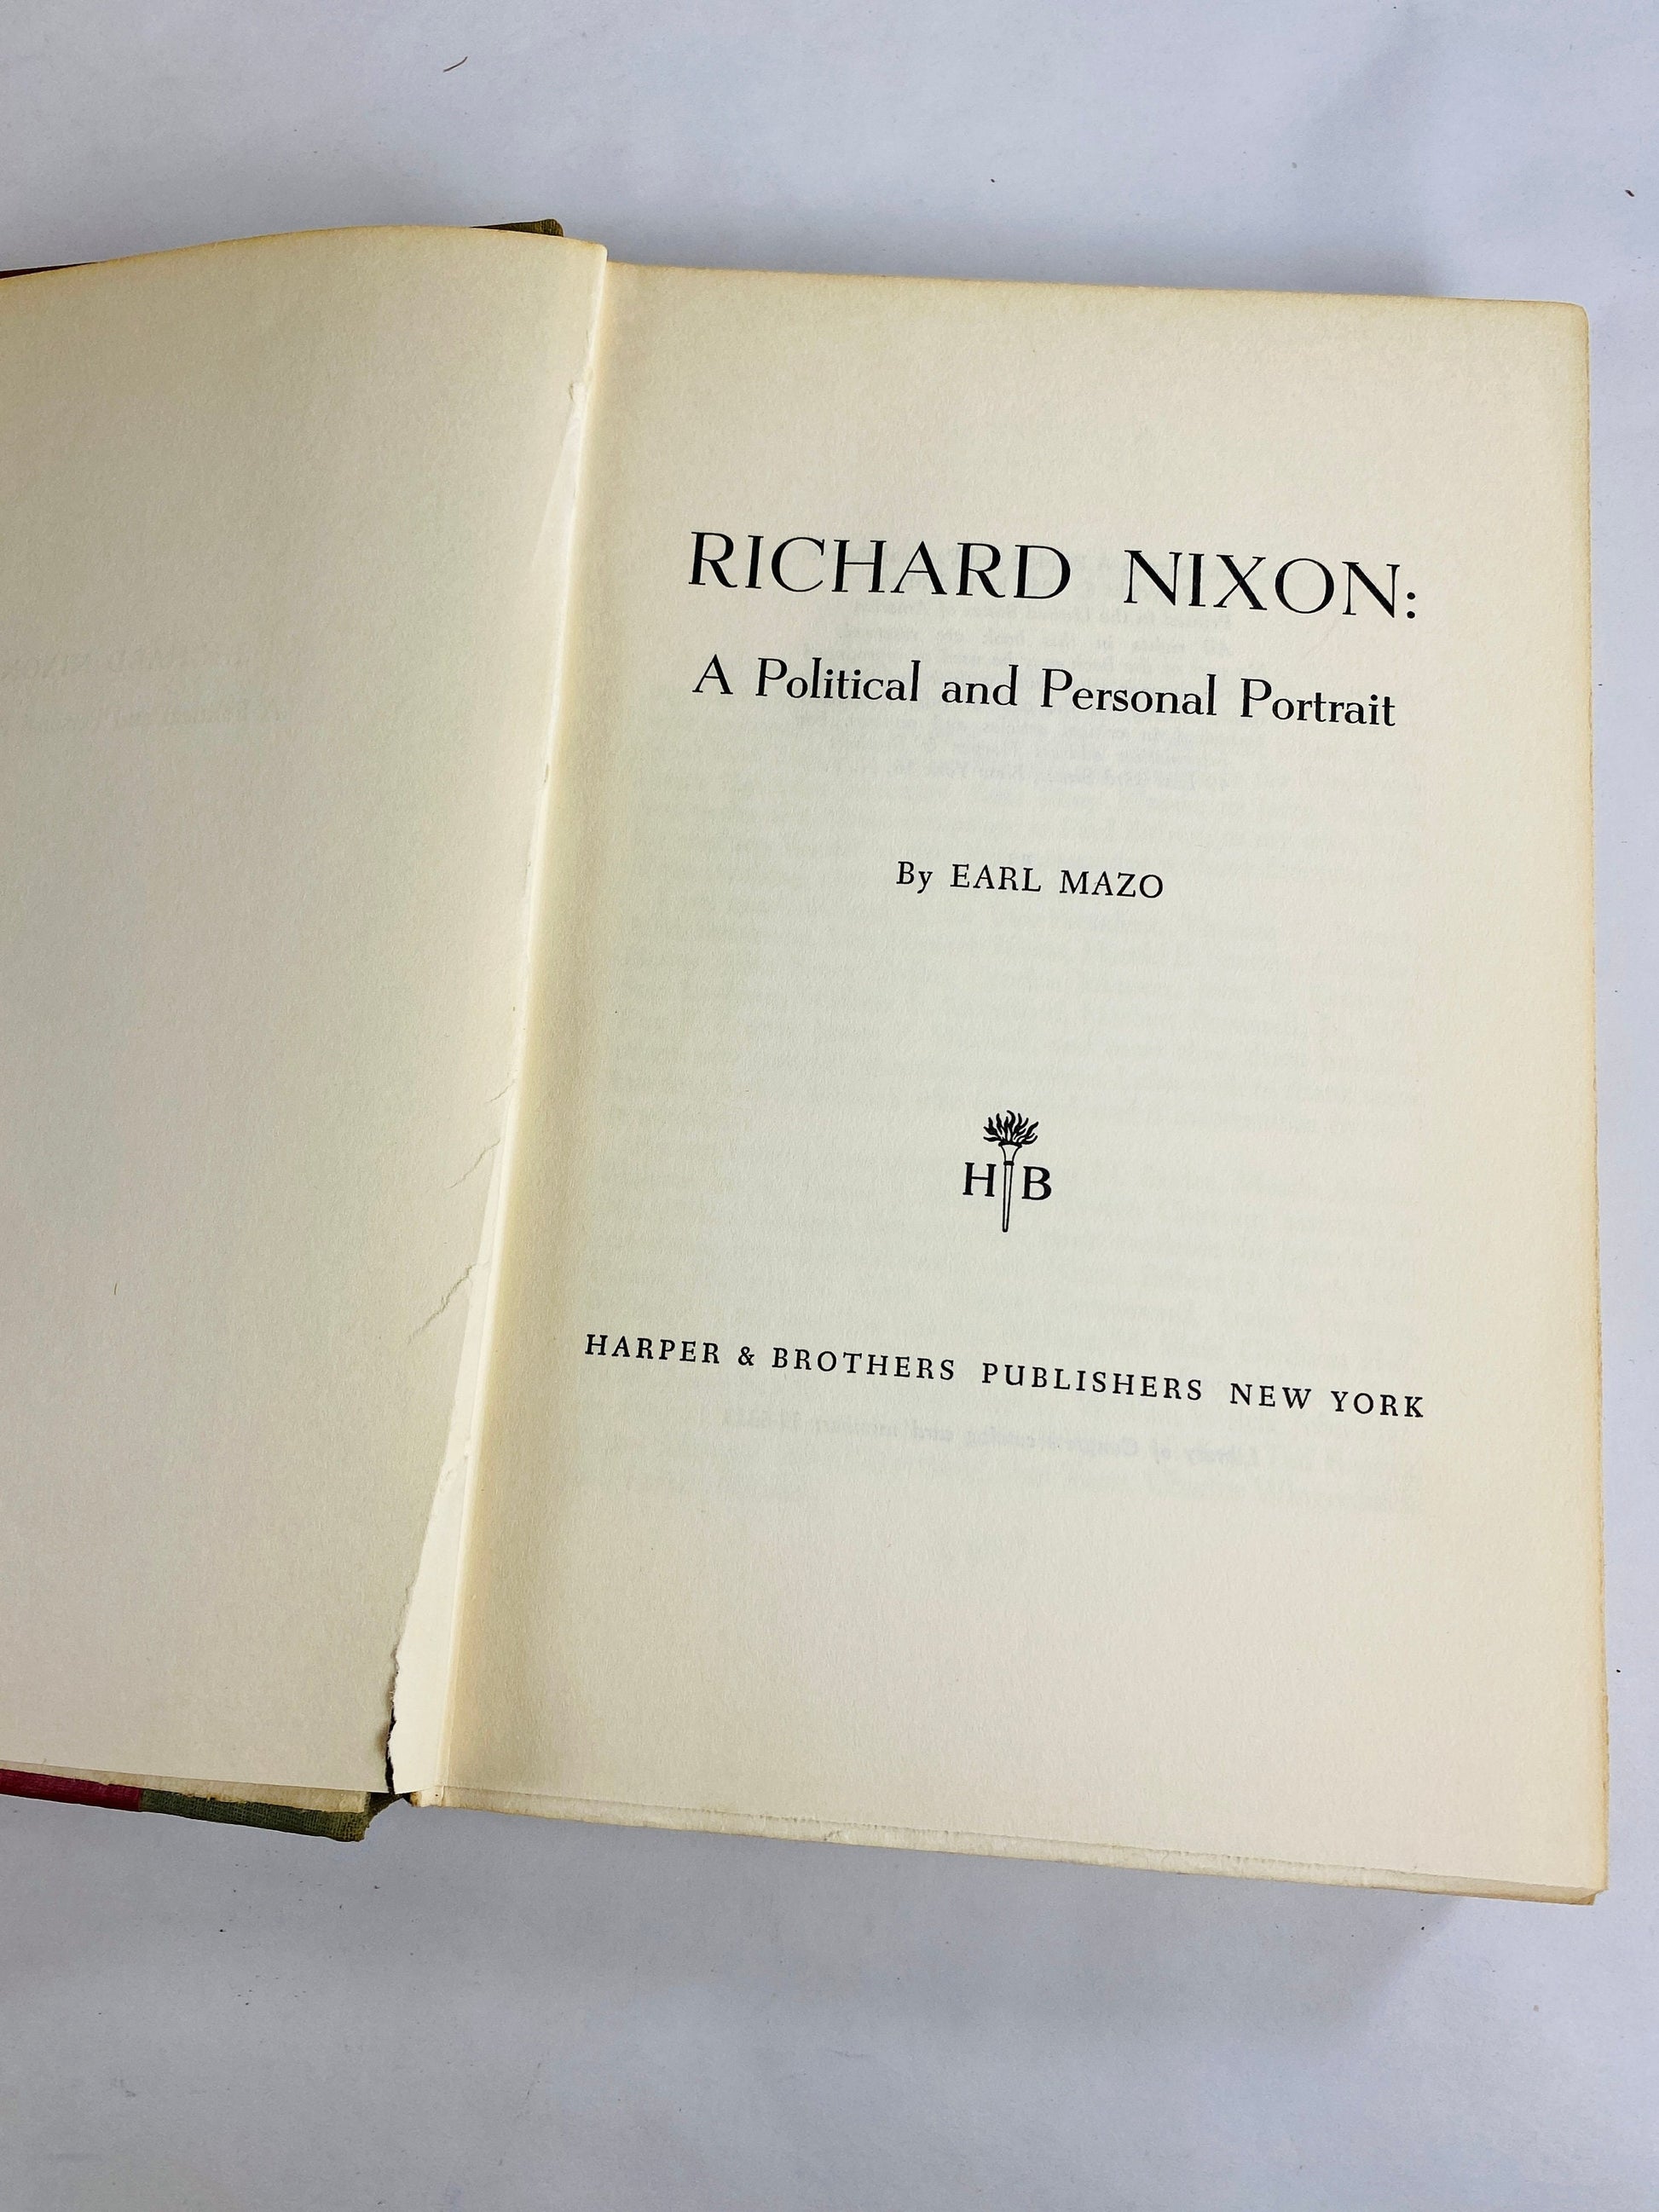 Richard Nixon Portrait by Earl Mazo vintage book circa 1959 detailing political and personal portrait of only US presidential resignation